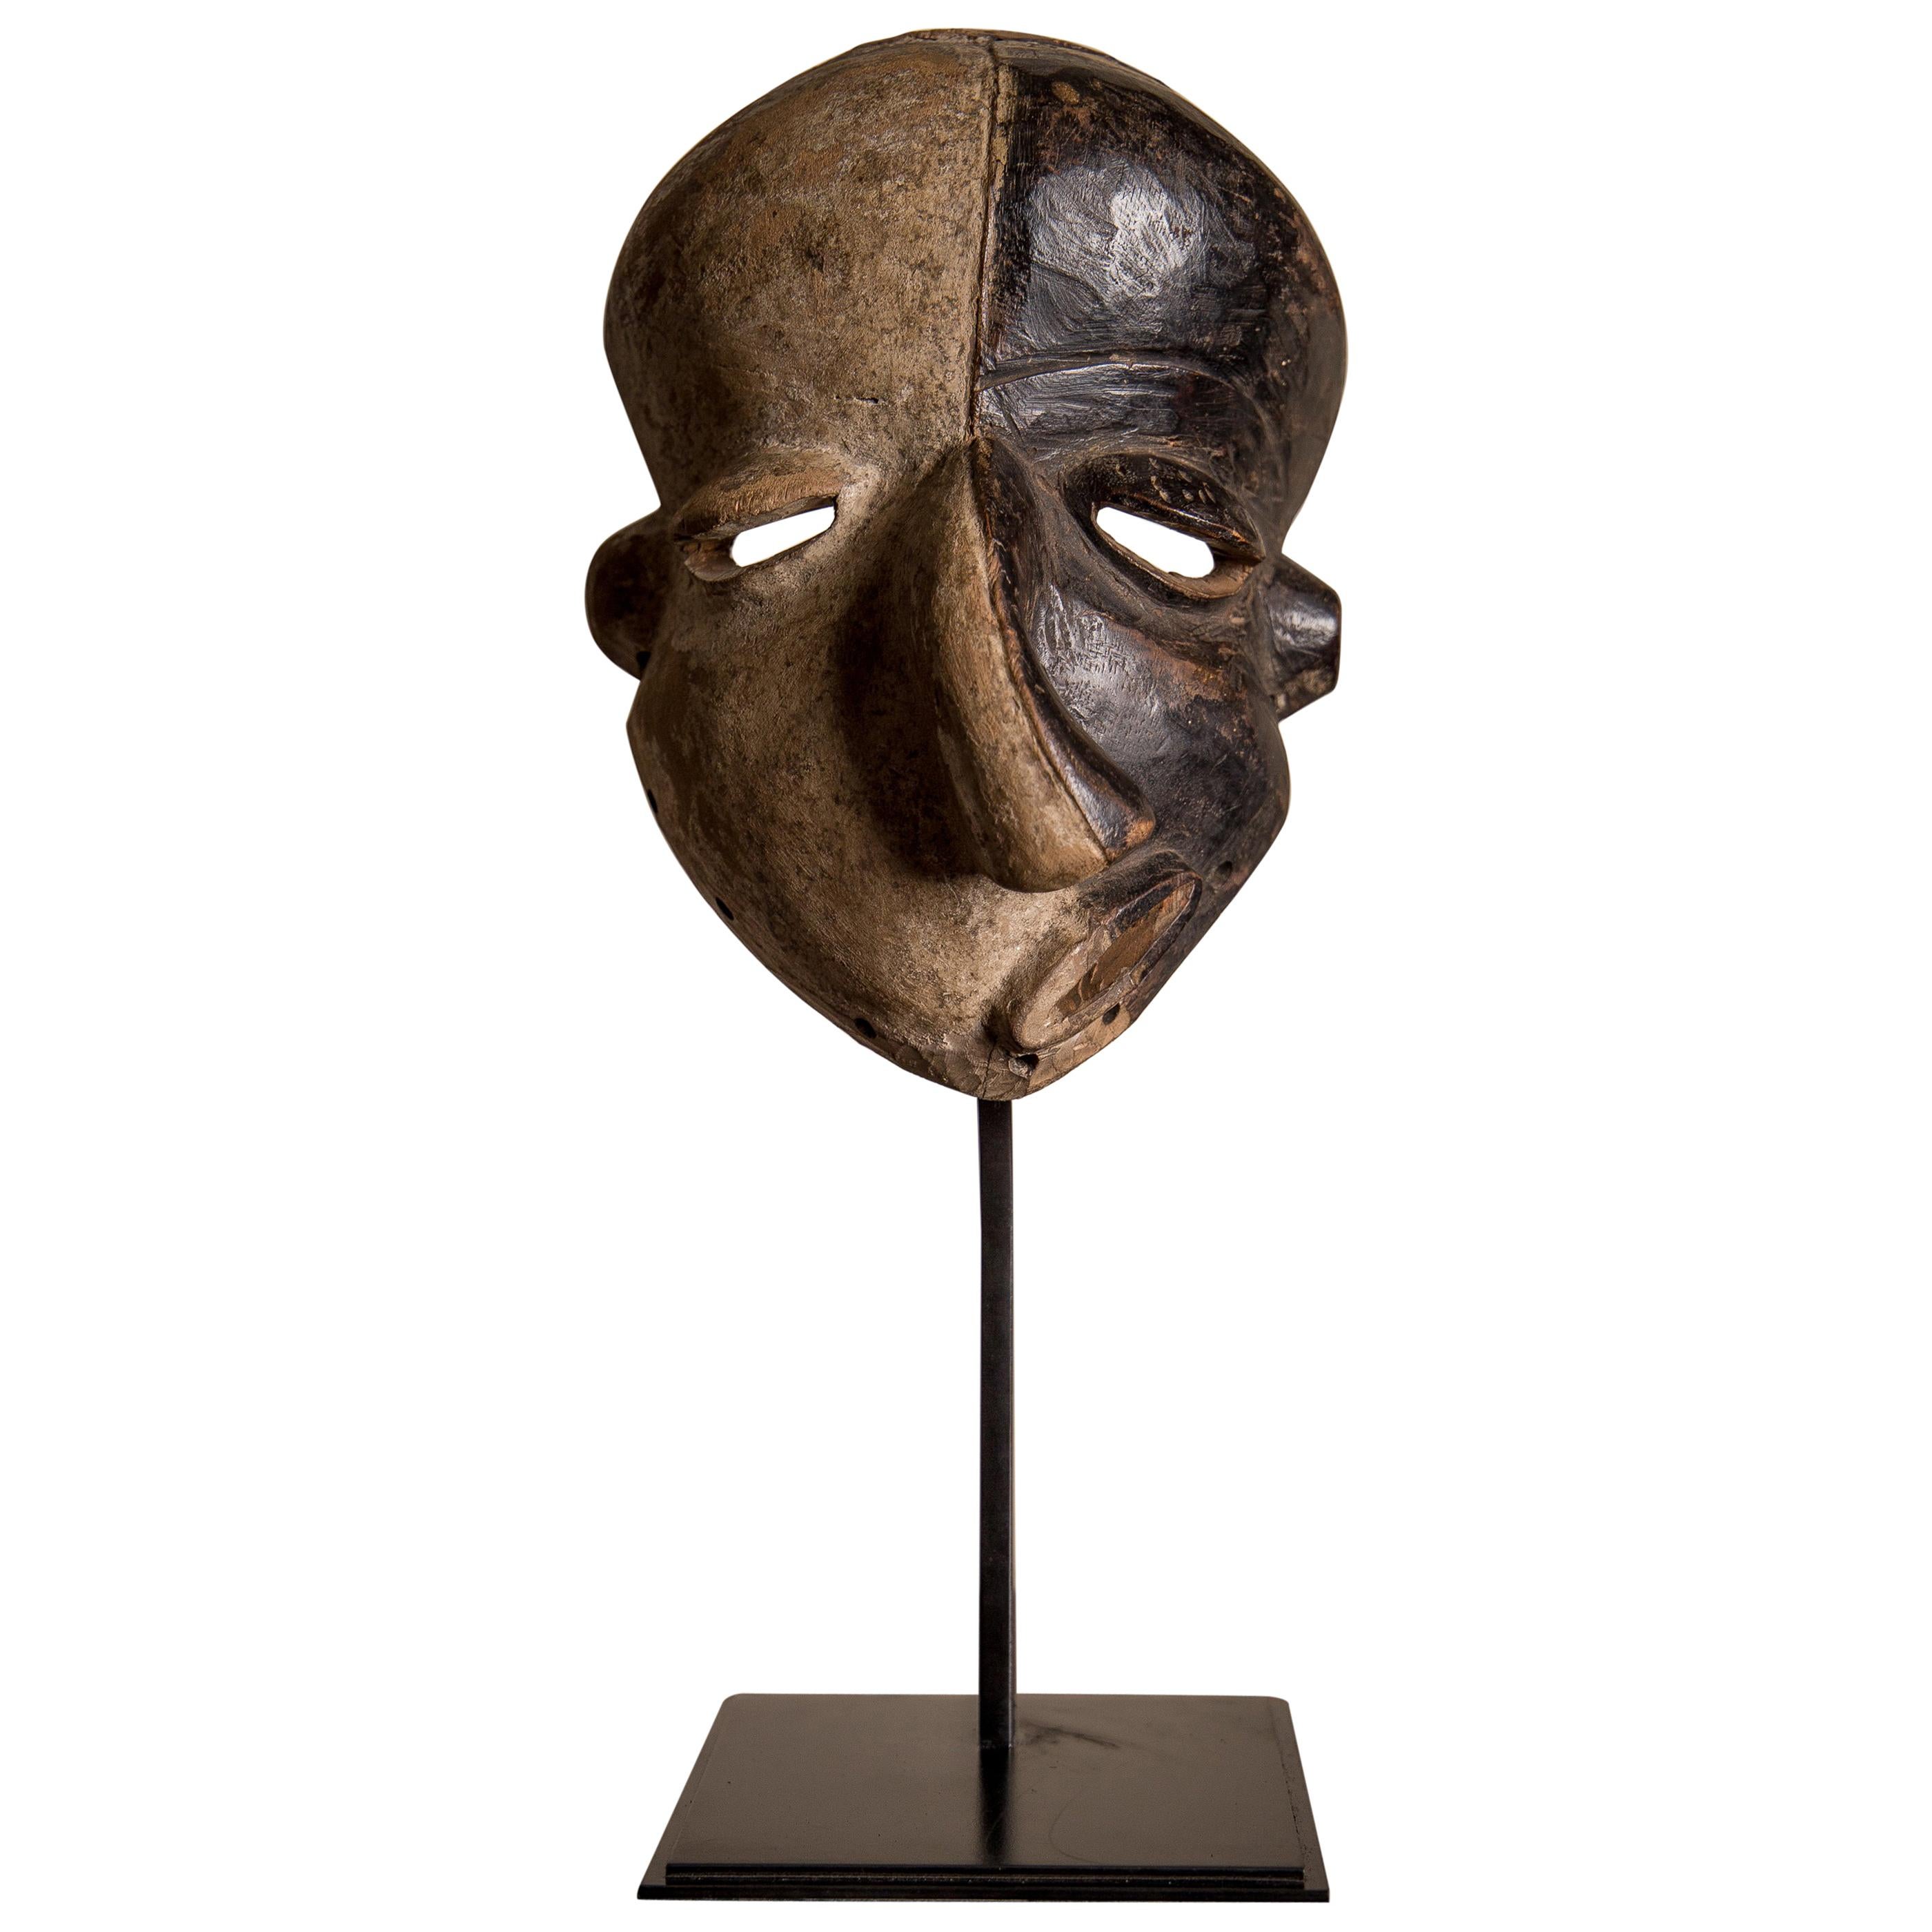 Pende 'Mbangu' Mask from a Private Collection, First of the Half 20th Century